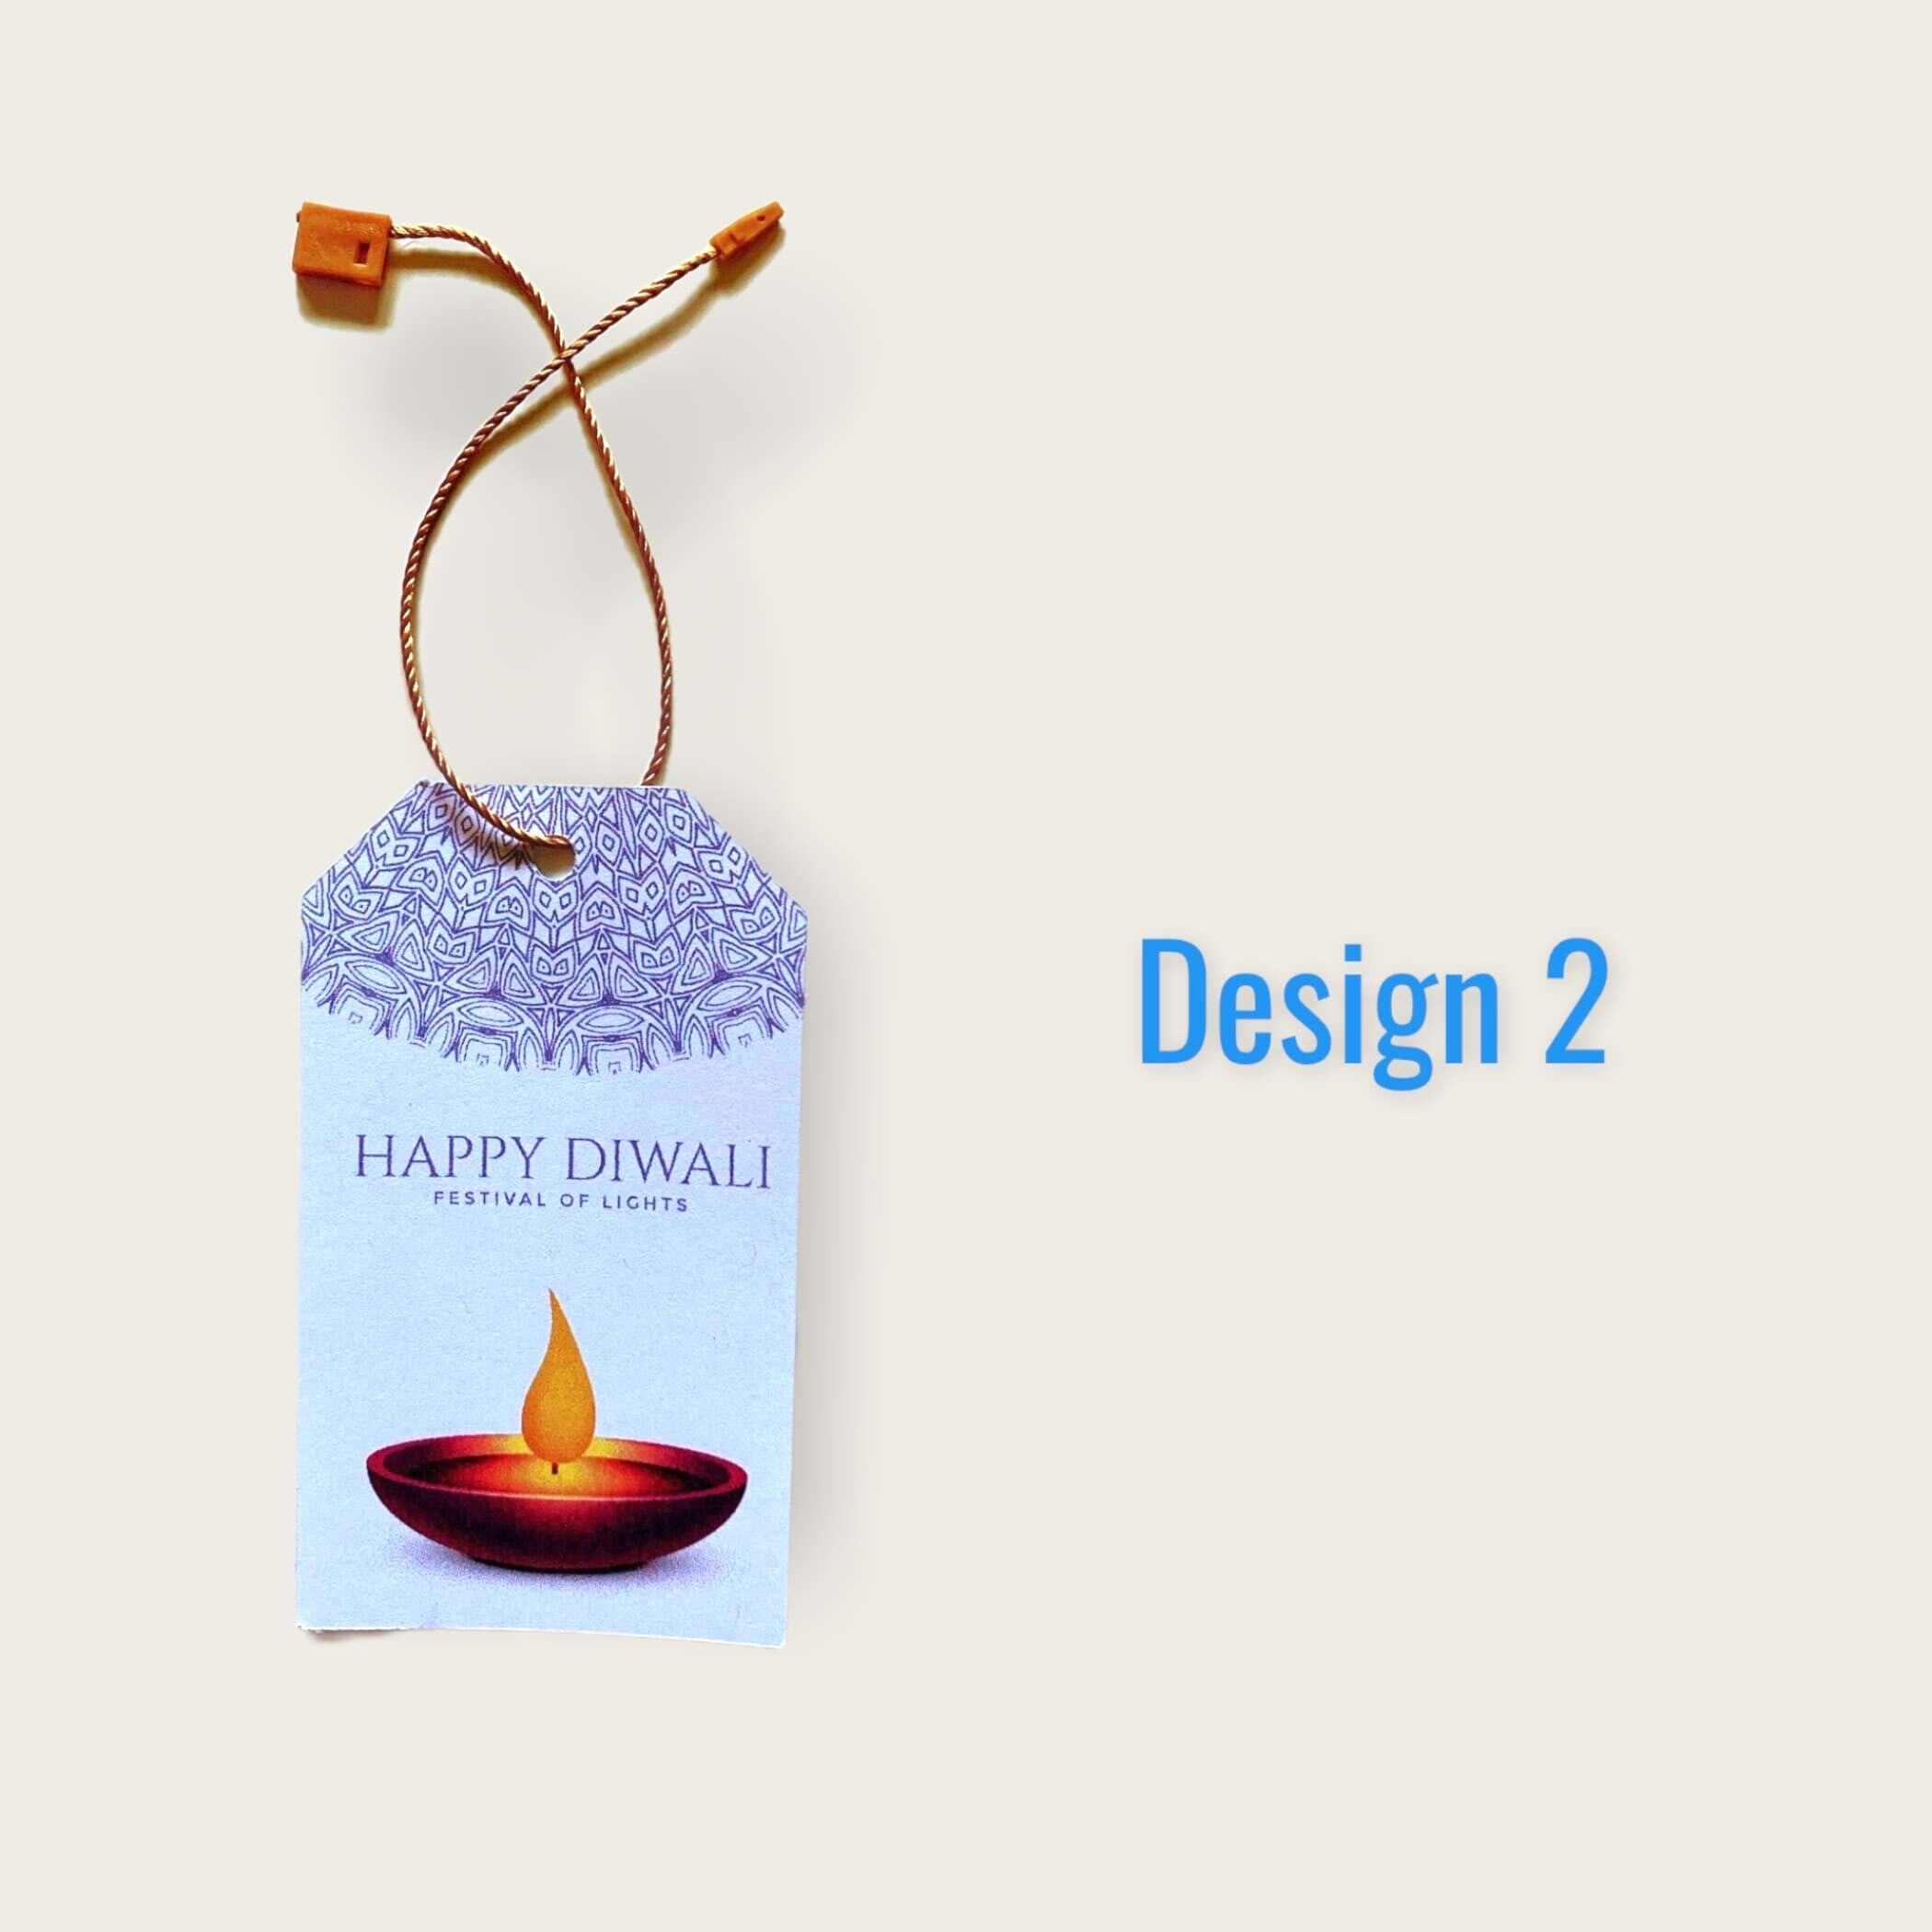 10 Printed Happy Diwali Gift Tags For Gifts Bags Deewali